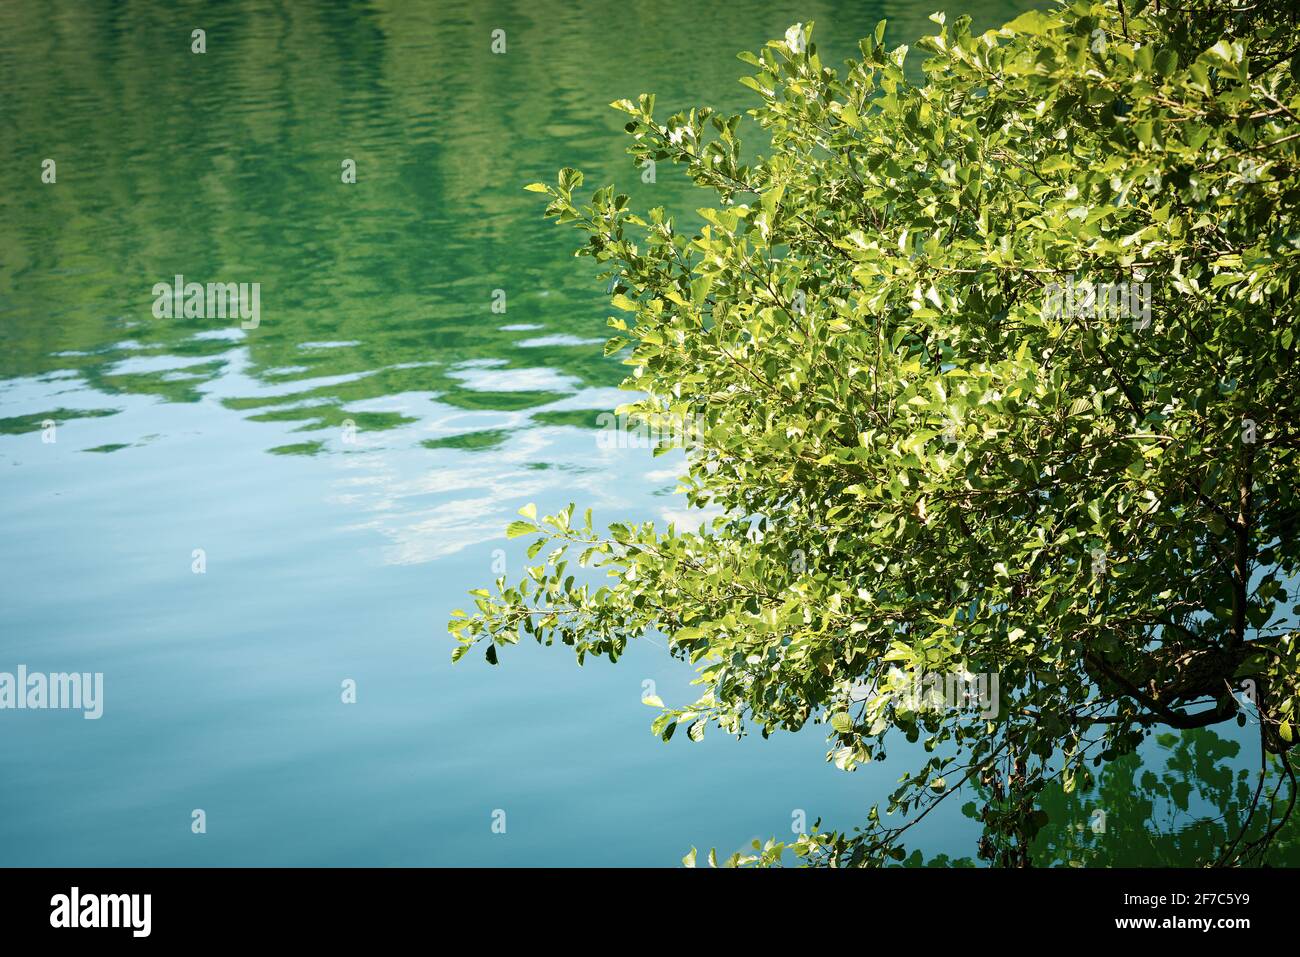 Close-up of a tree with lush green leaves above the surface of the water. Lago di Levico, small lake in Italian Alps. Levico Terme, Trentino, Italy. Stock Photo